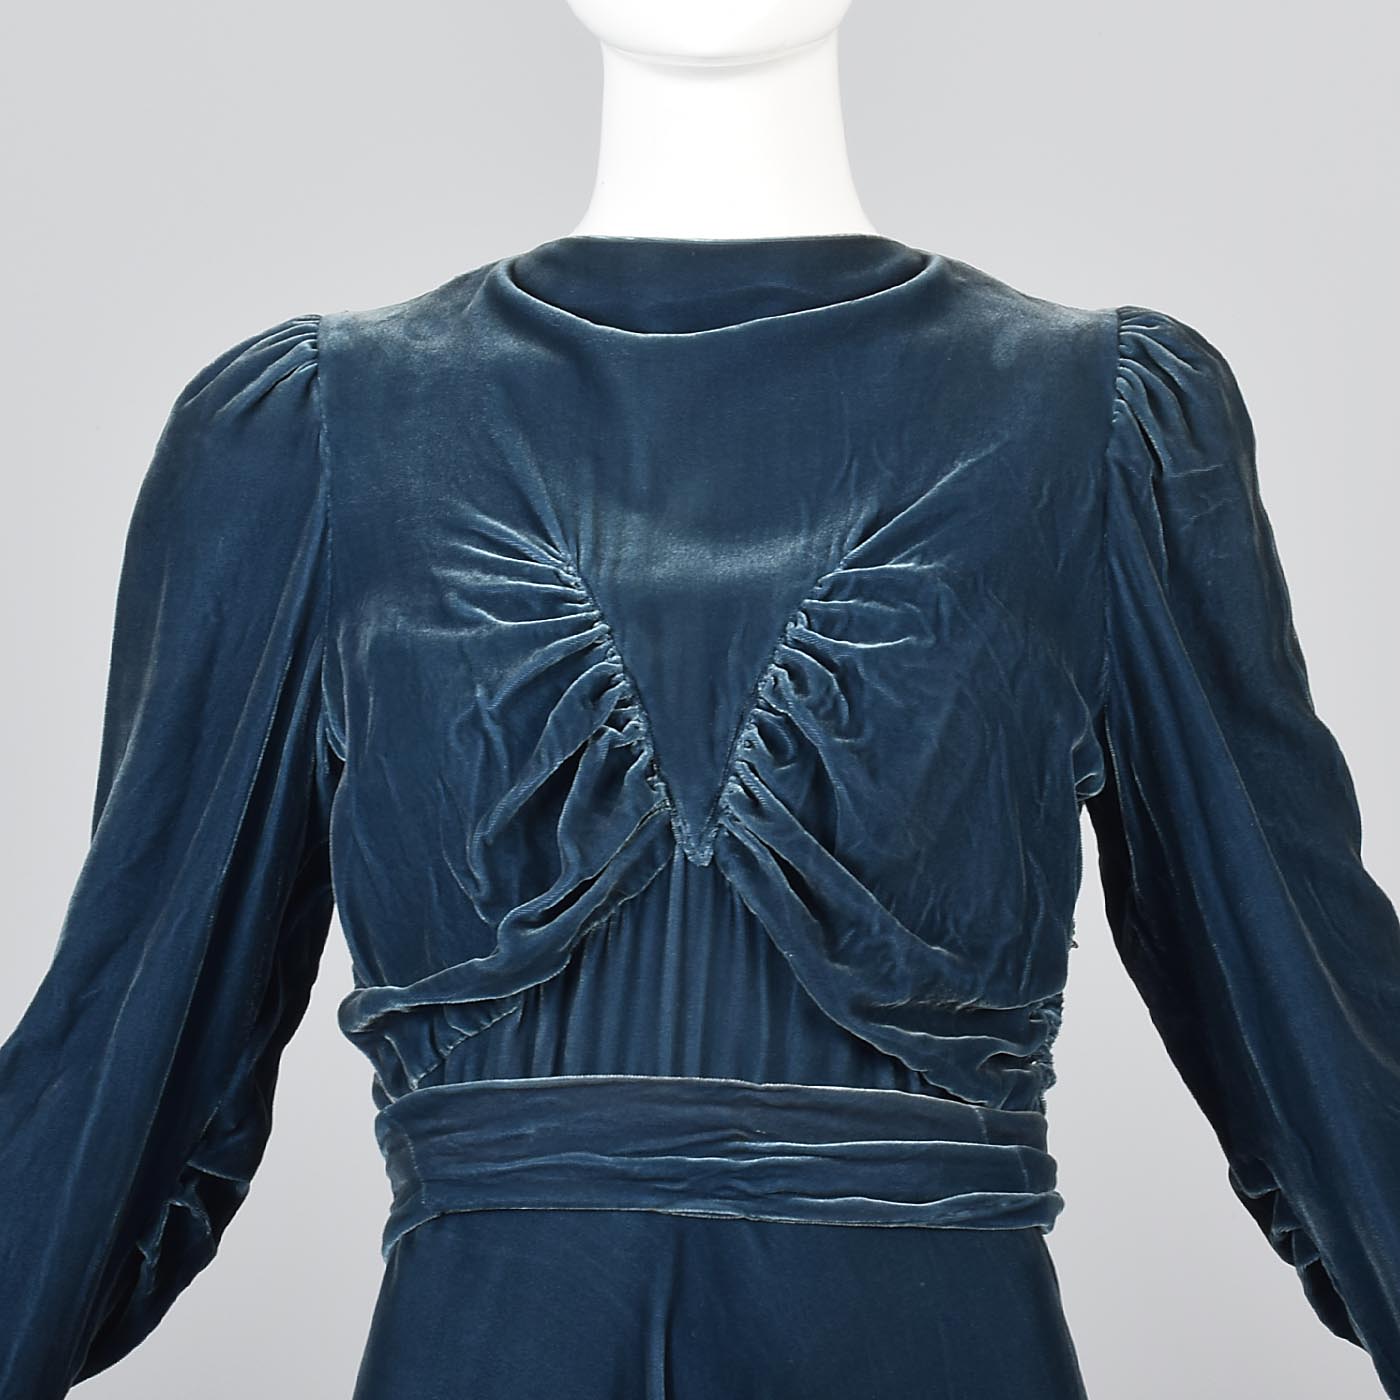 1930s Blue Velvet Gown with Gathered Bodice